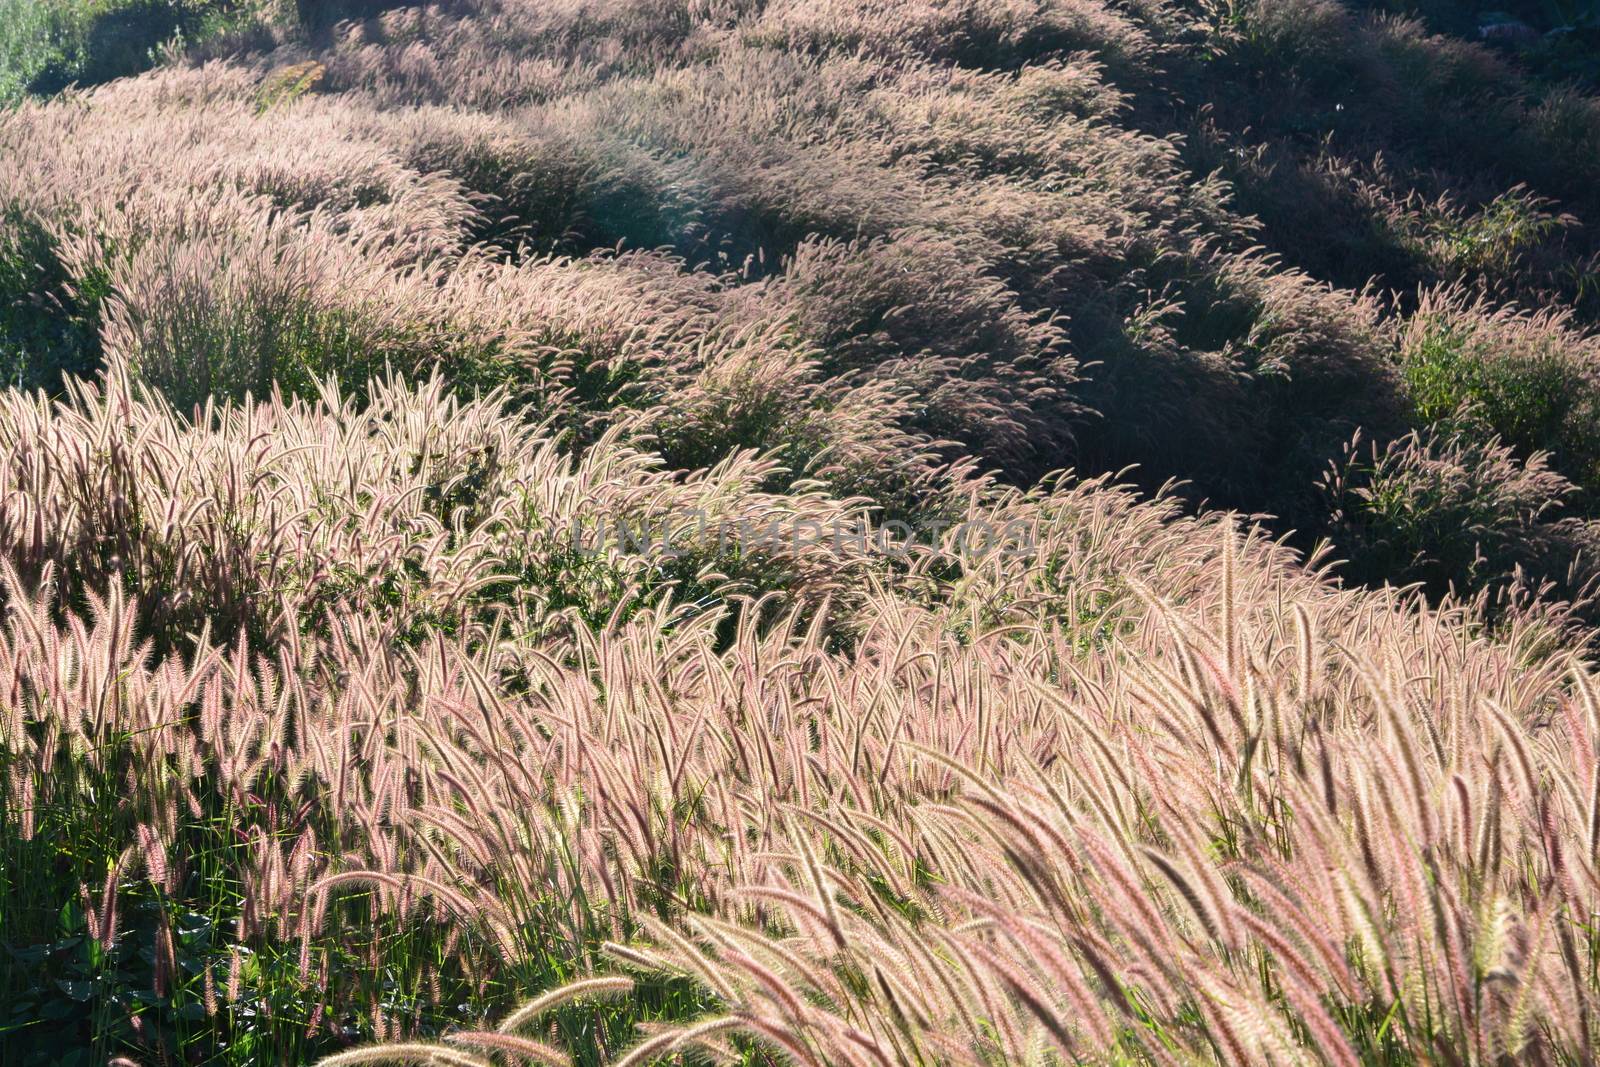 Fountain Grass Ornamental Plant in Meadow  by ideation90